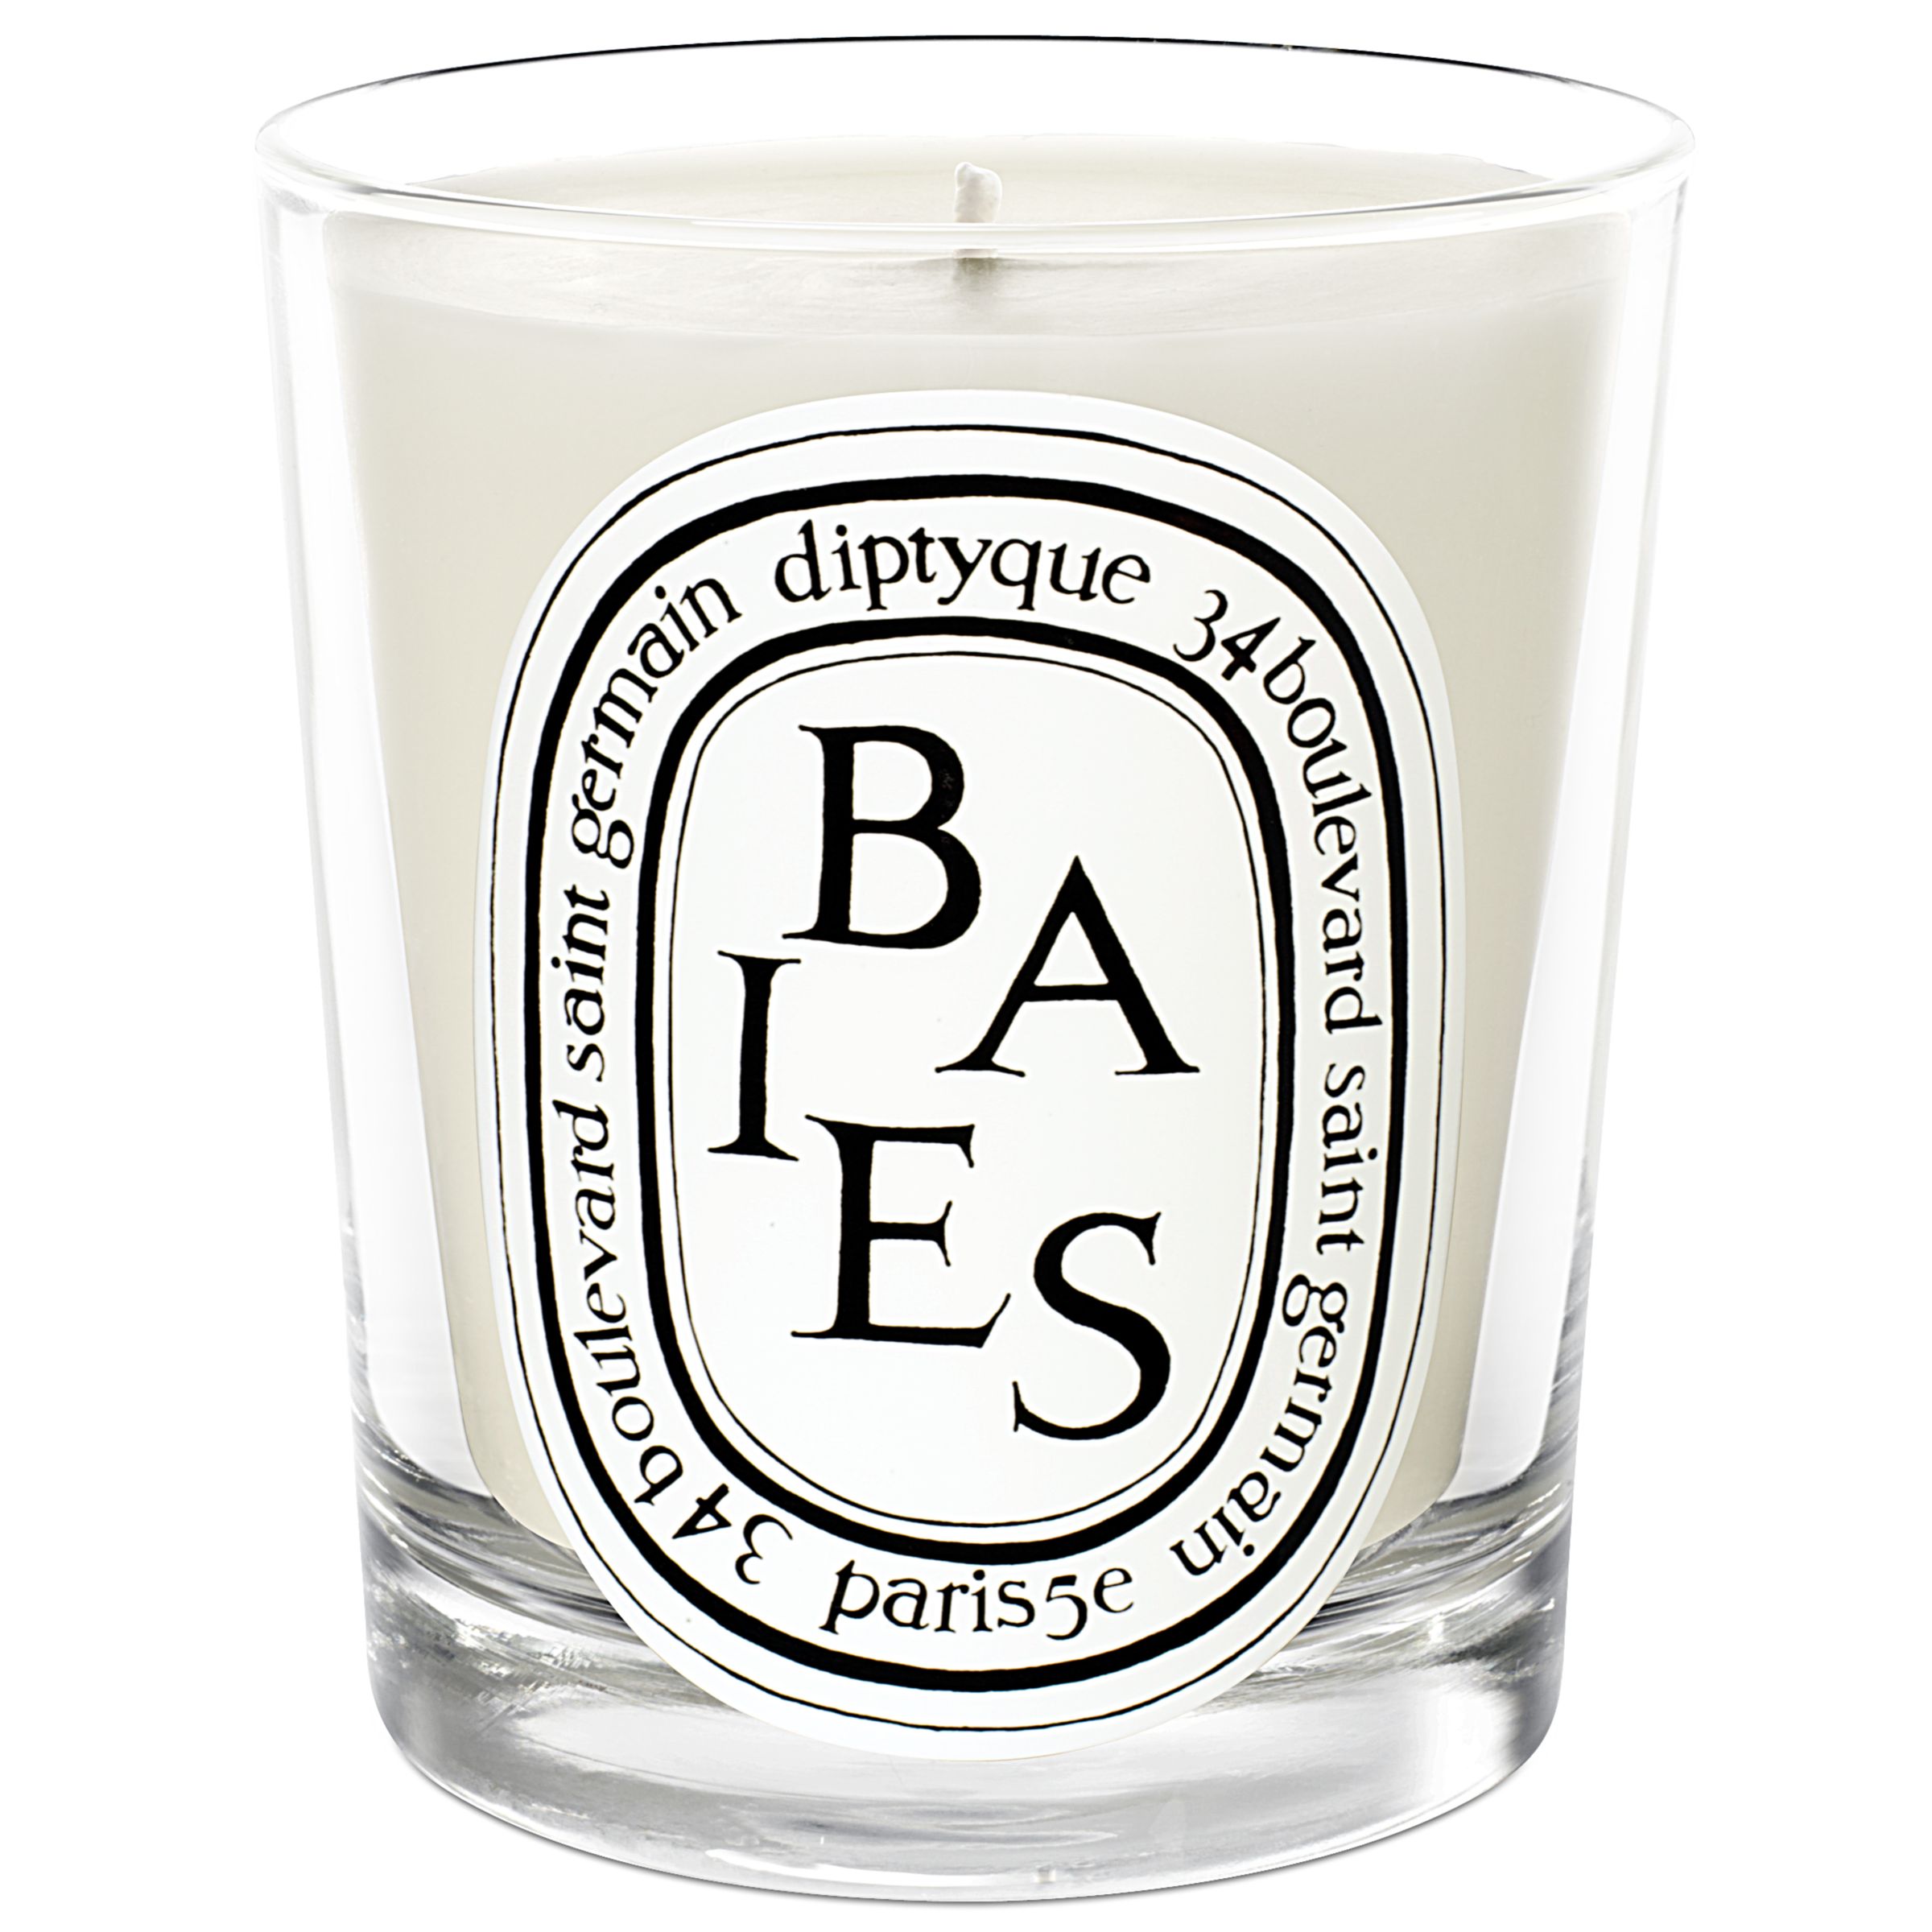 Buy Diptyque Baies Scented Candle, 190g Online at johnlewis.com